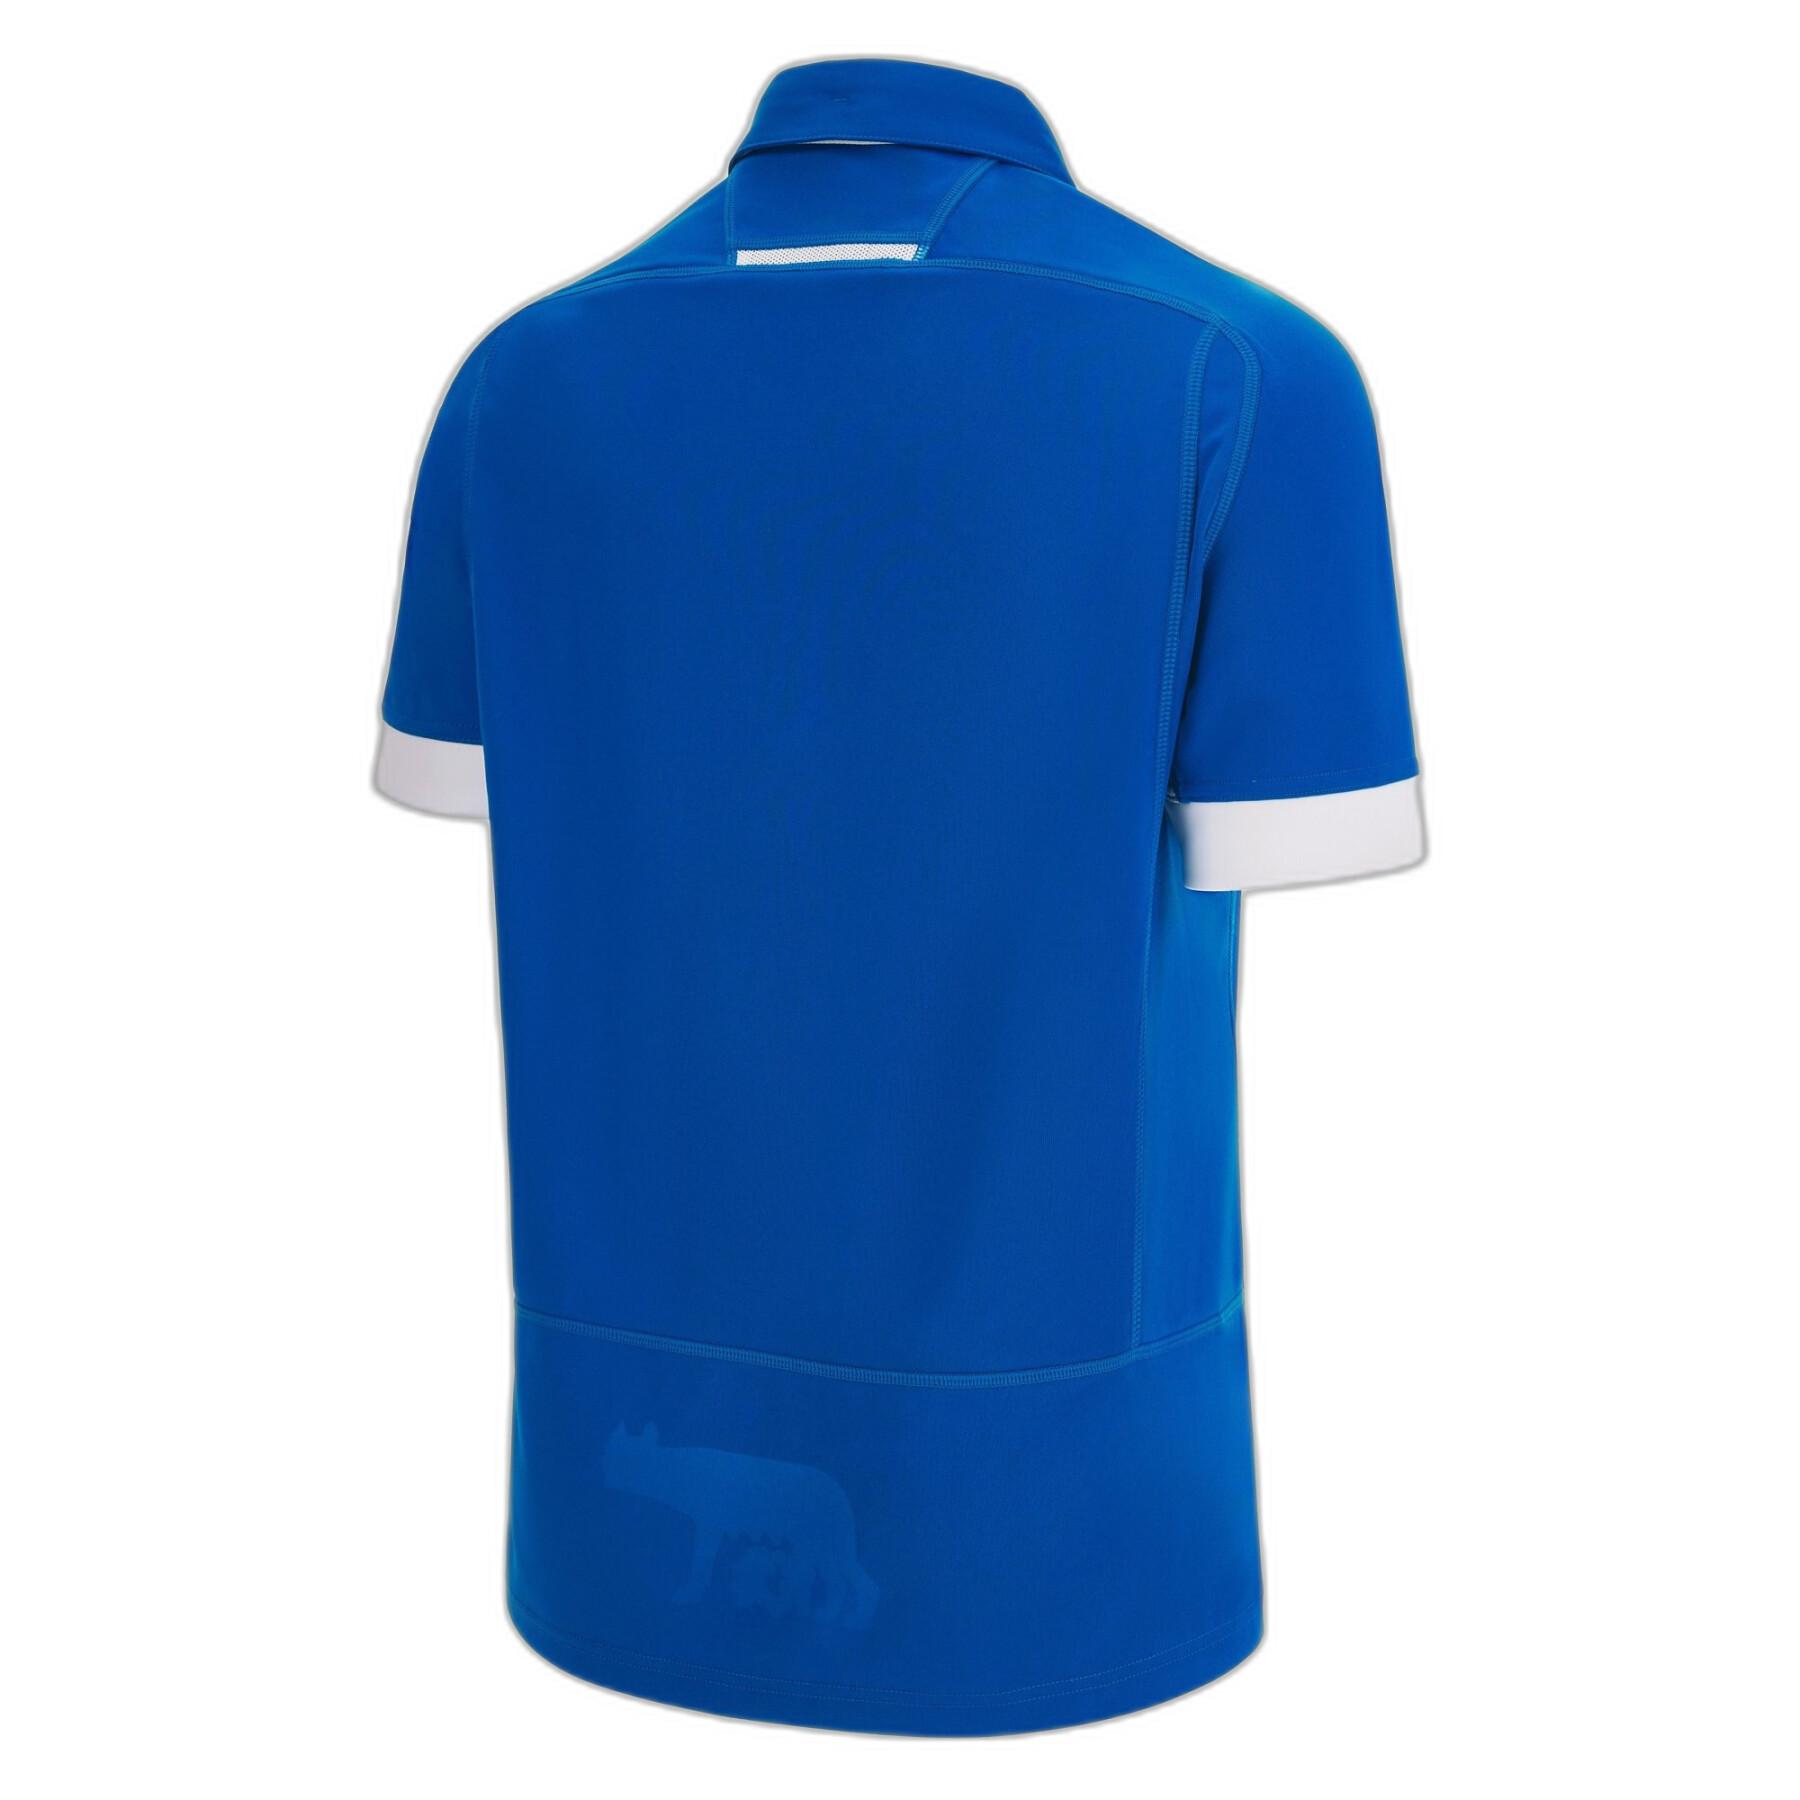 Rugby World Cup 2023 home jersey Italy